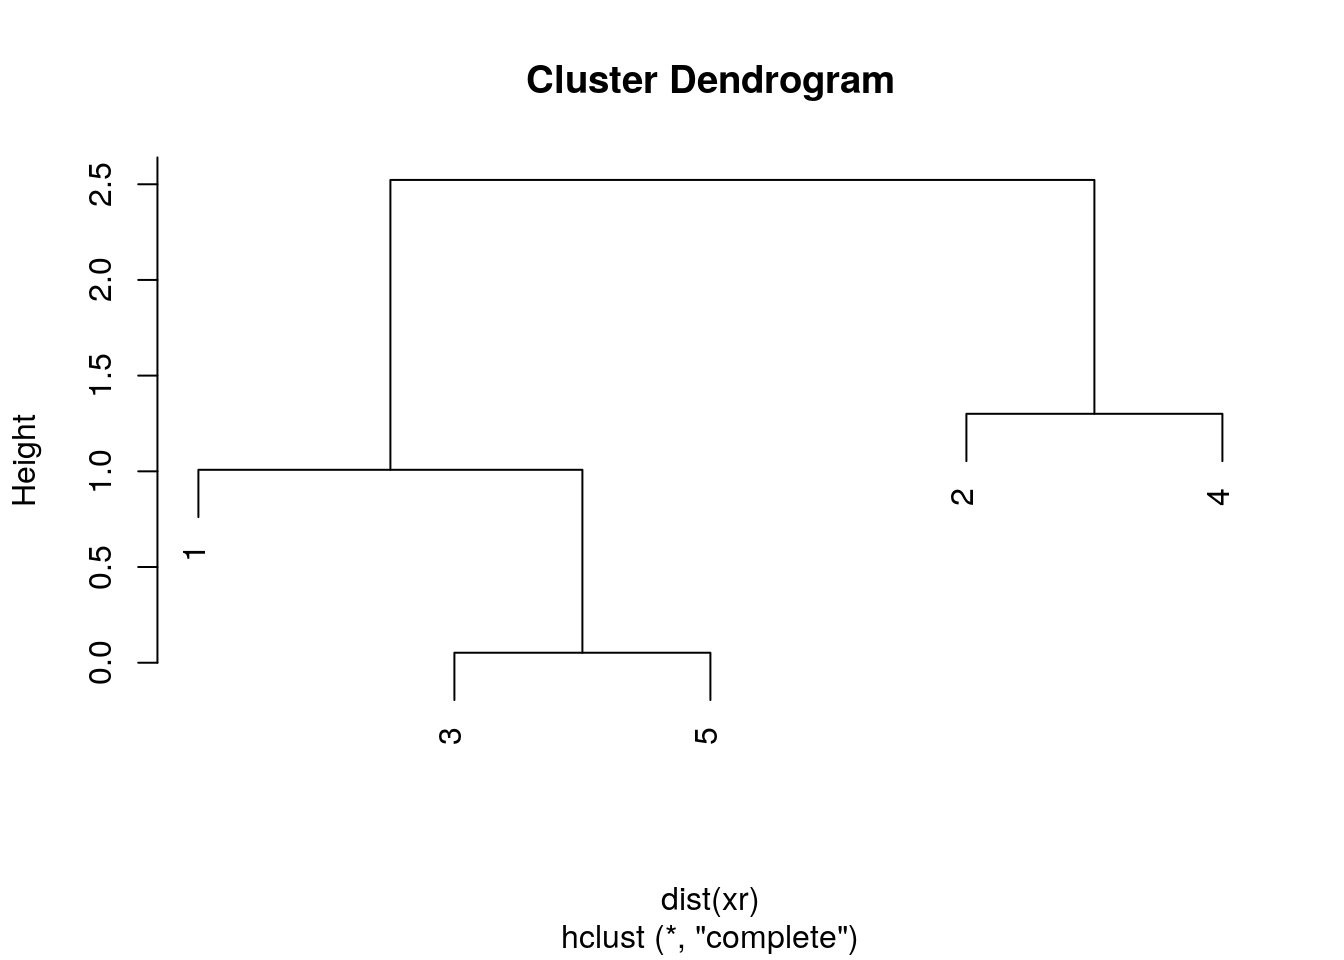 Visualisation of the hierarchical clustering results on a dendrogram